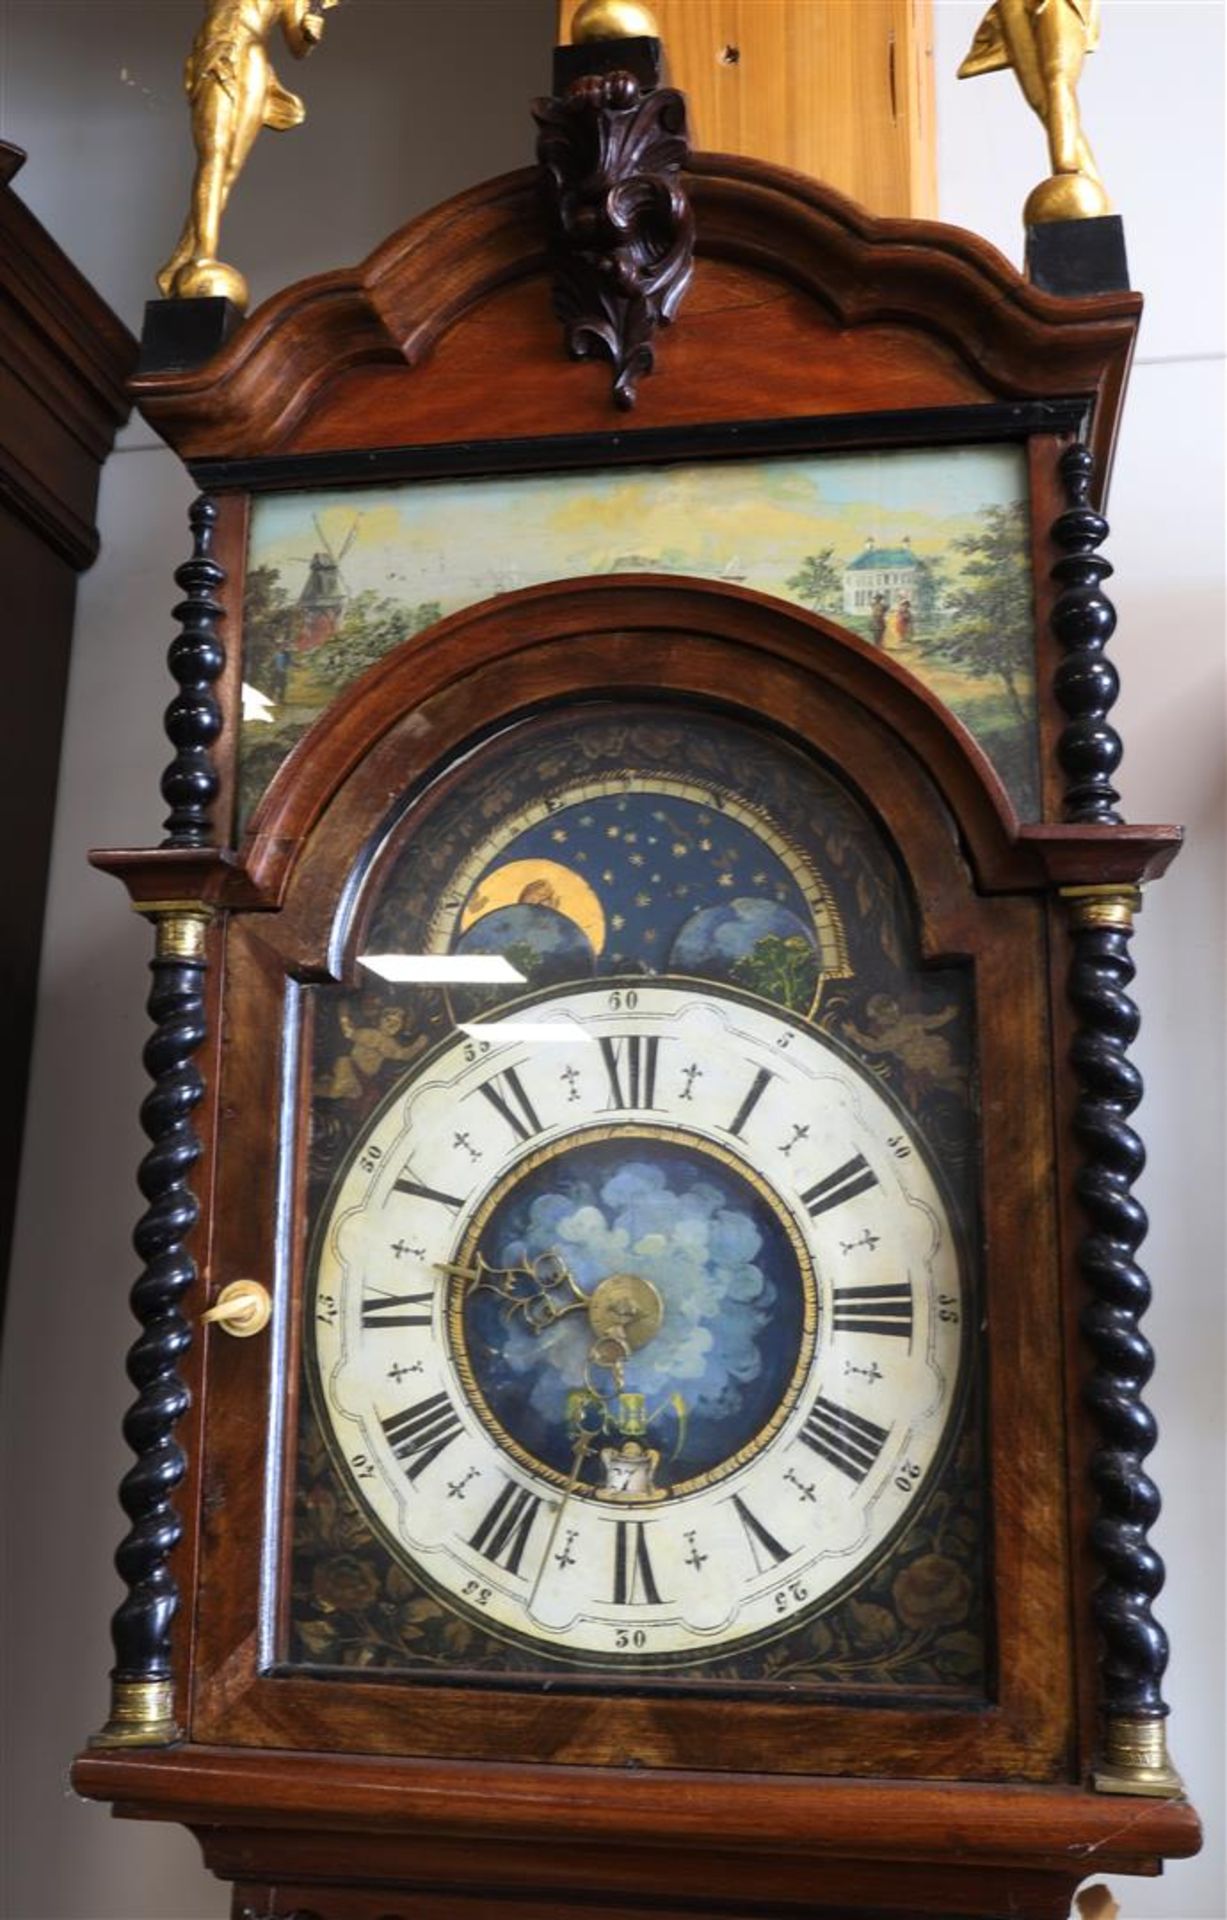 A double hooded tail clock with date and moon indication, 1st half 19th century. - Image 2 of 2